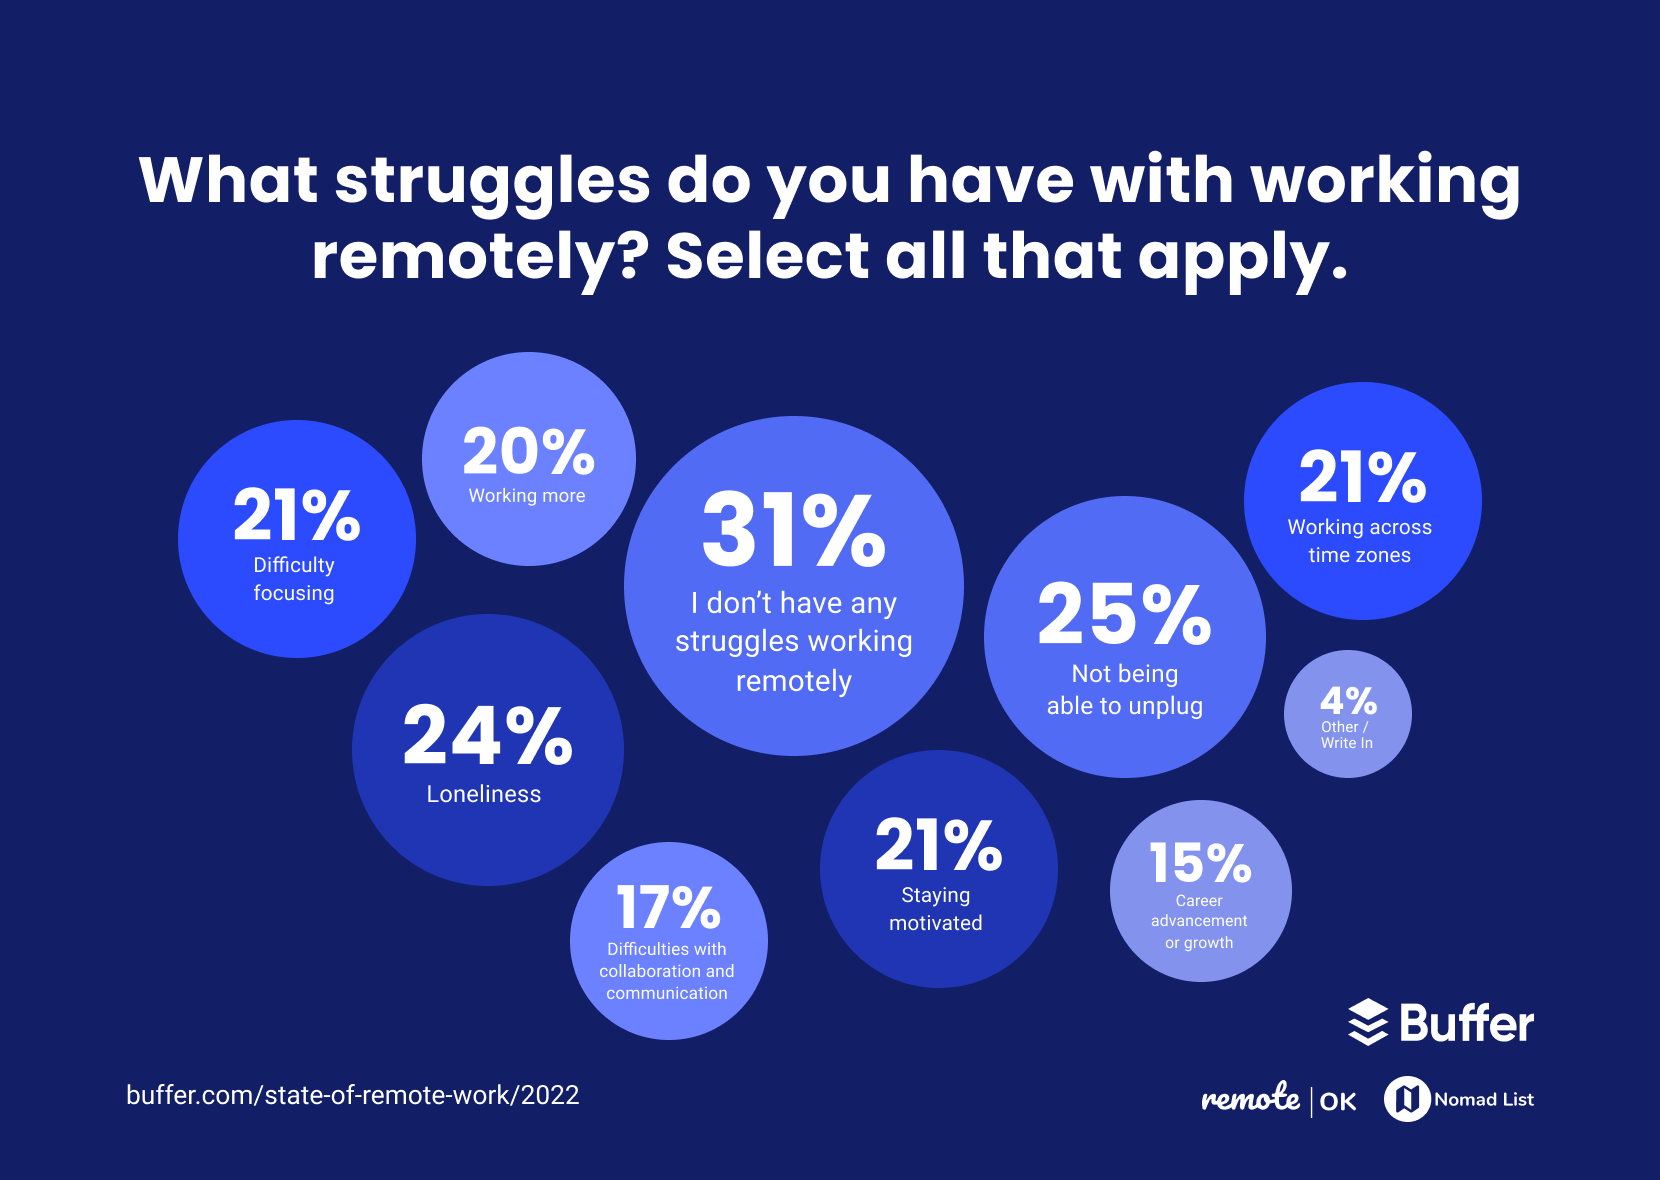 What struggles do you have with working remotely?